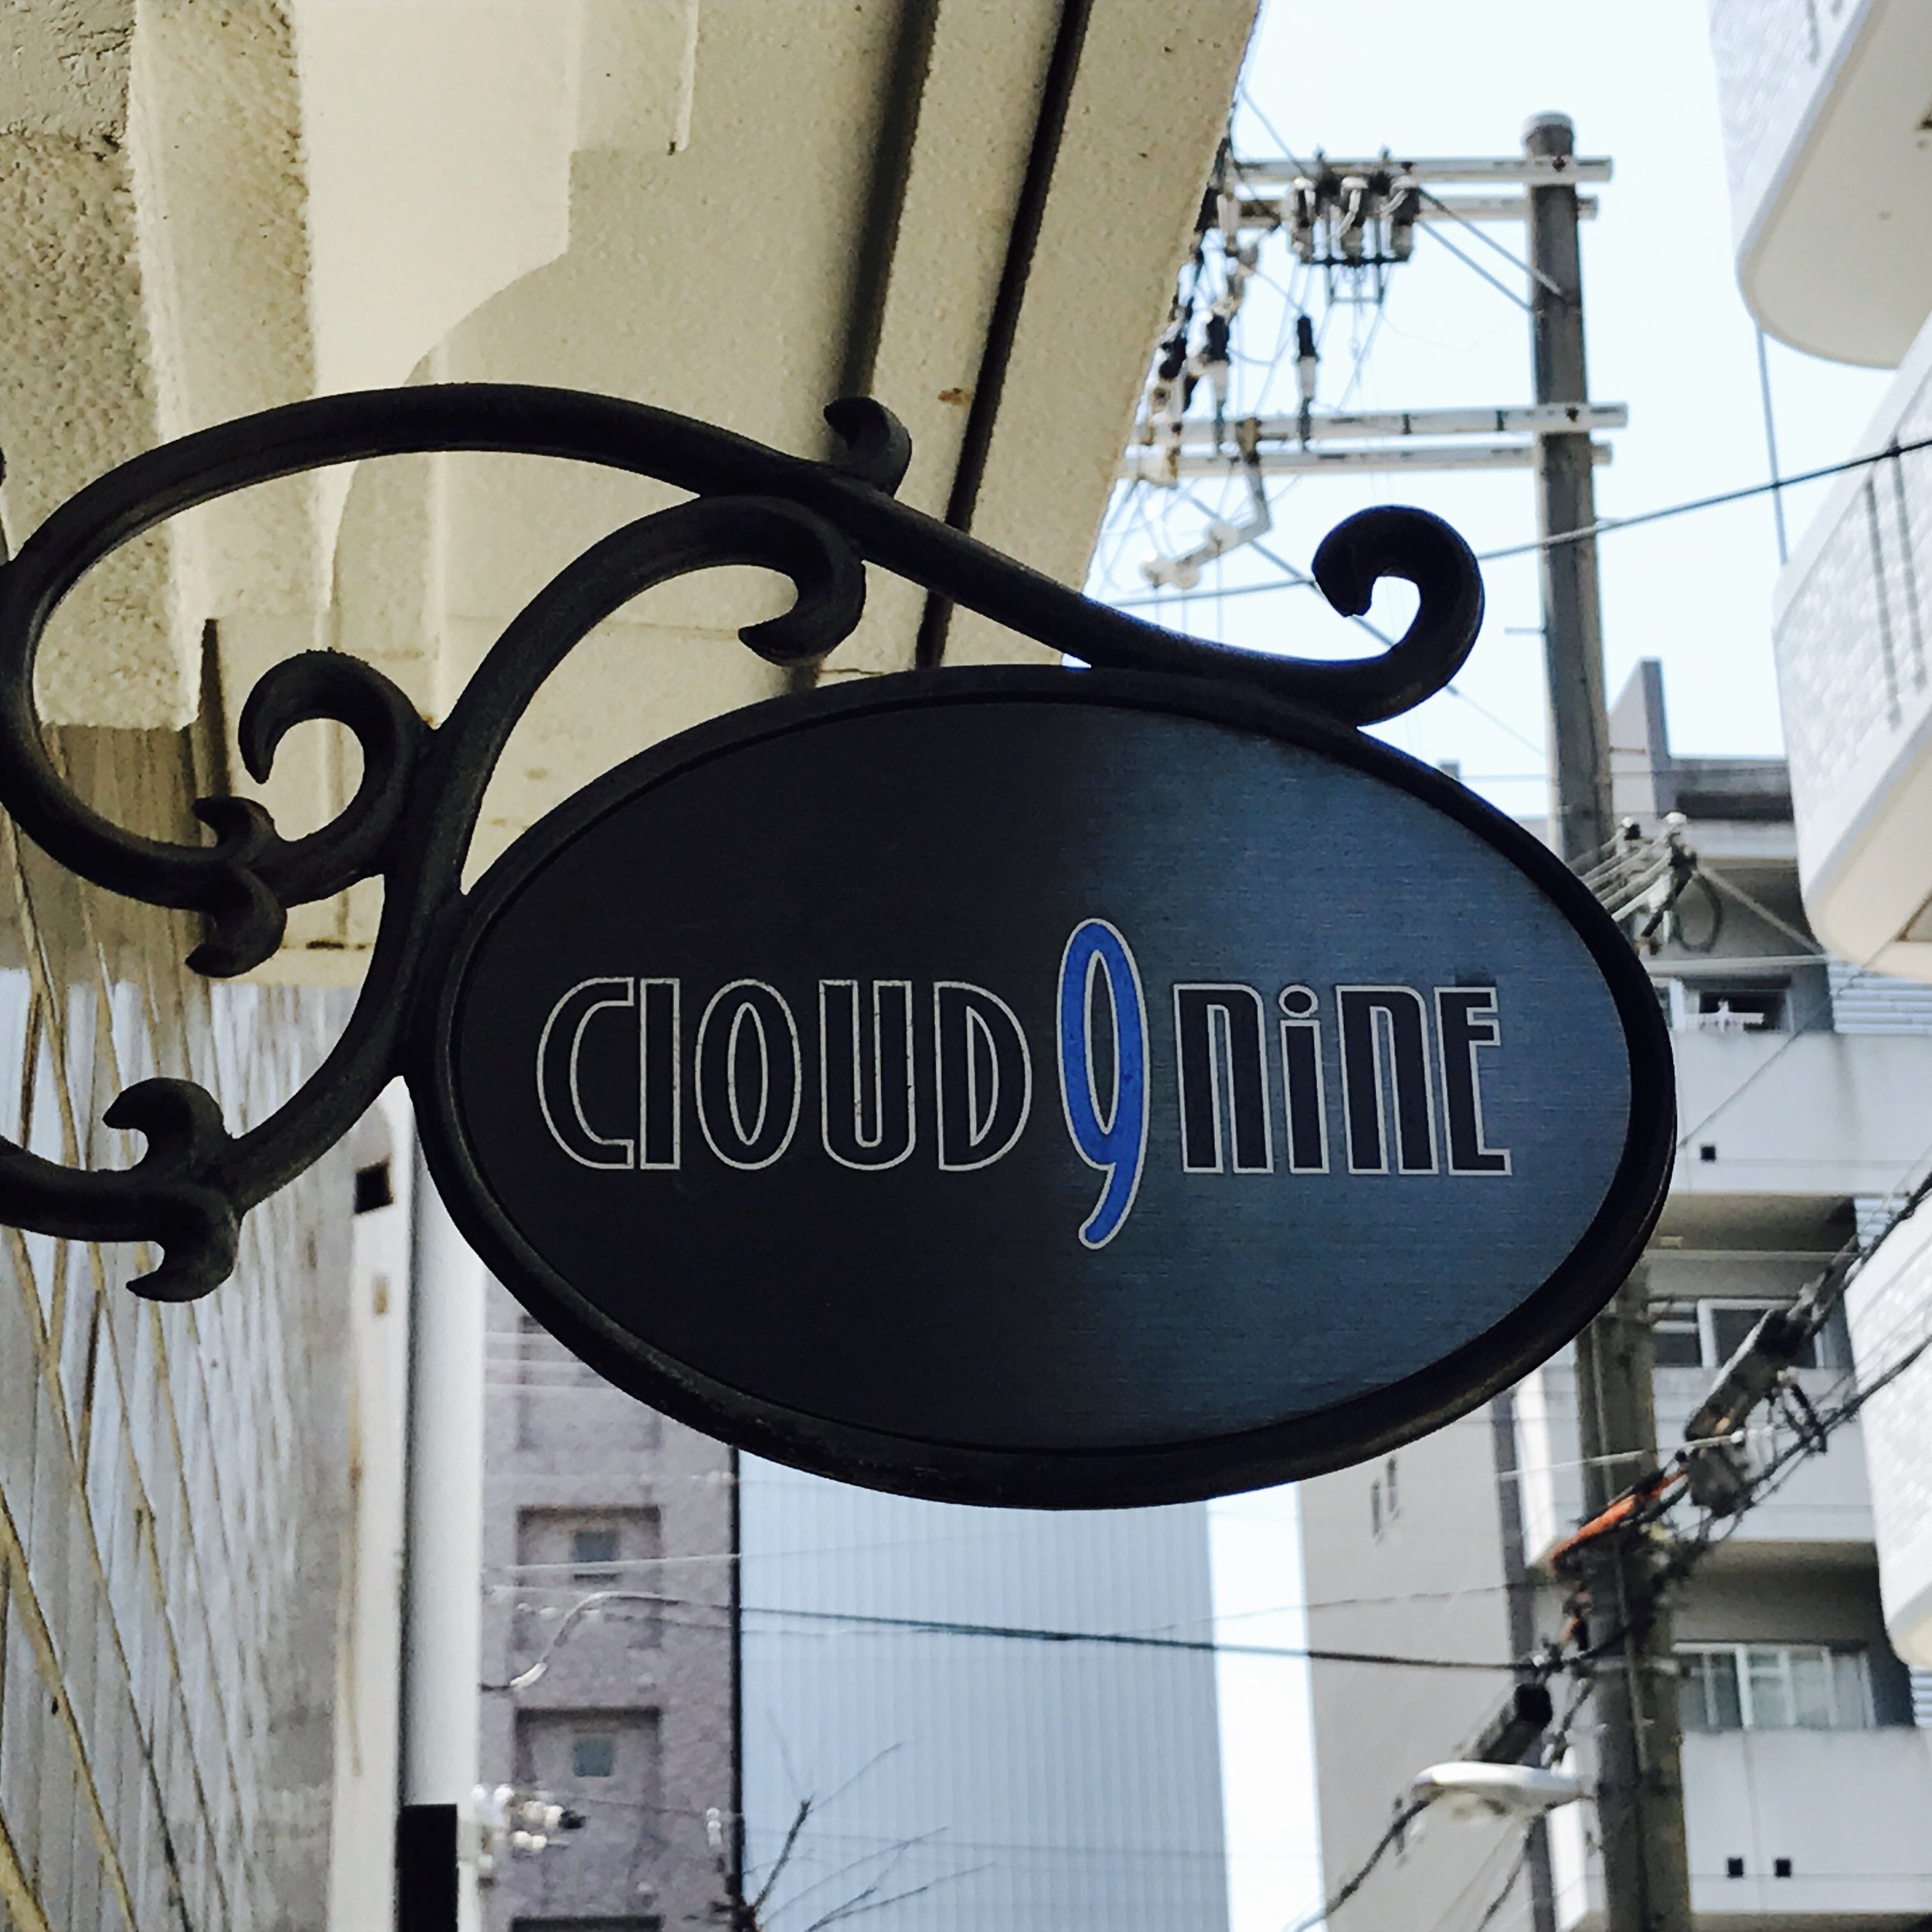 Click here for a complete review of Cloud Nine in Osaka, Japan